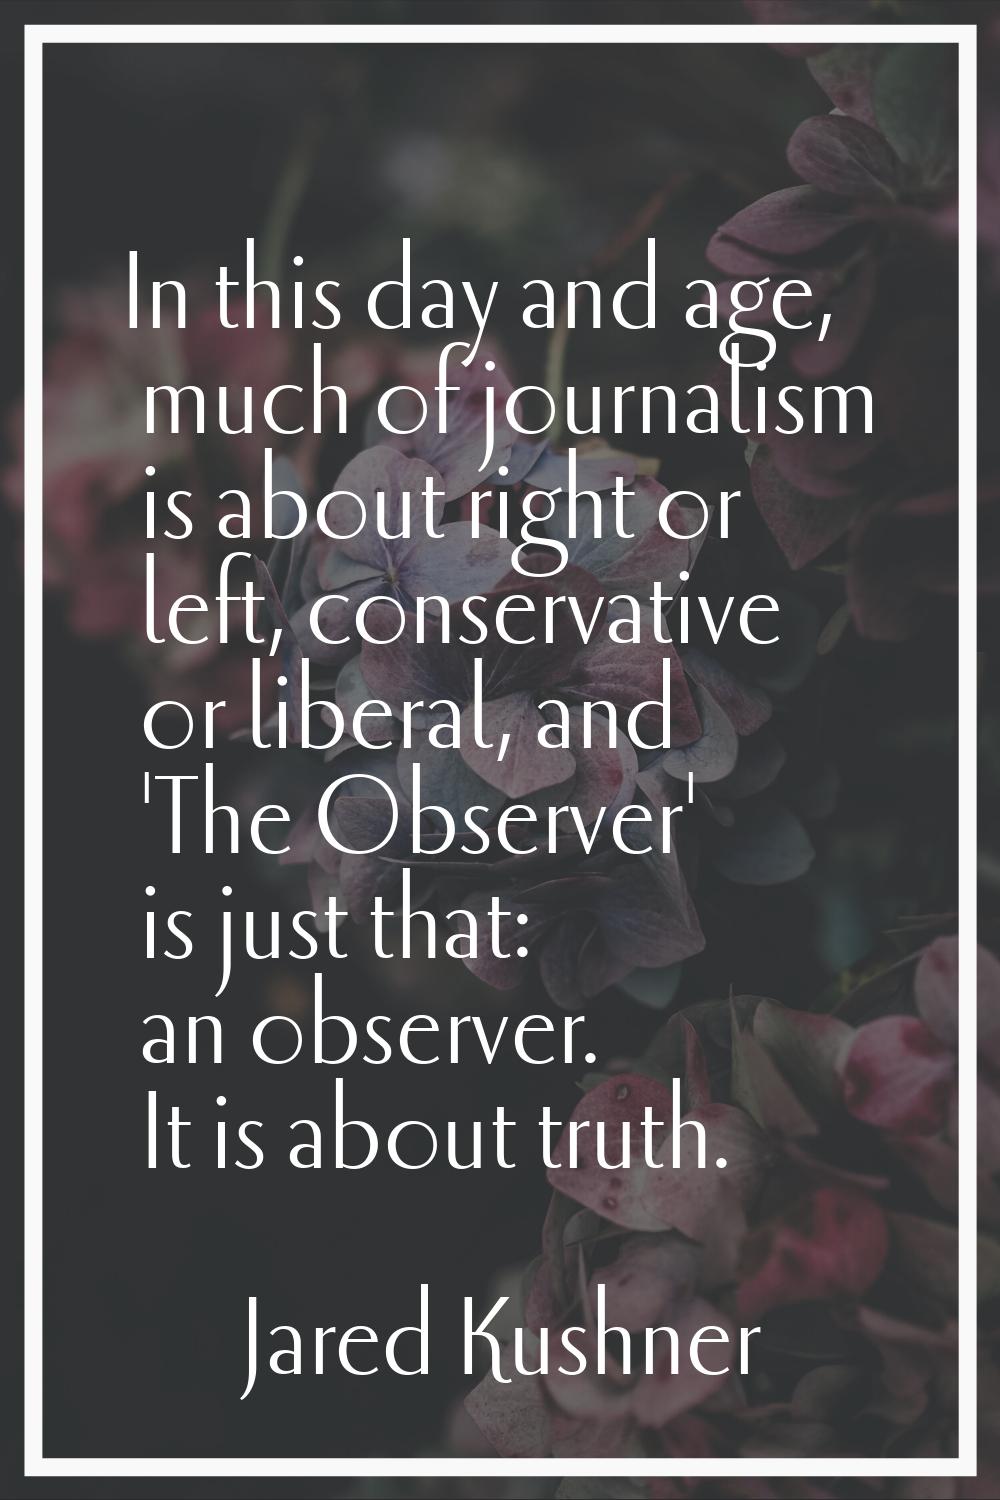 In this day and age, much of journalism is about right or left, conservative or liberal, and 'The O